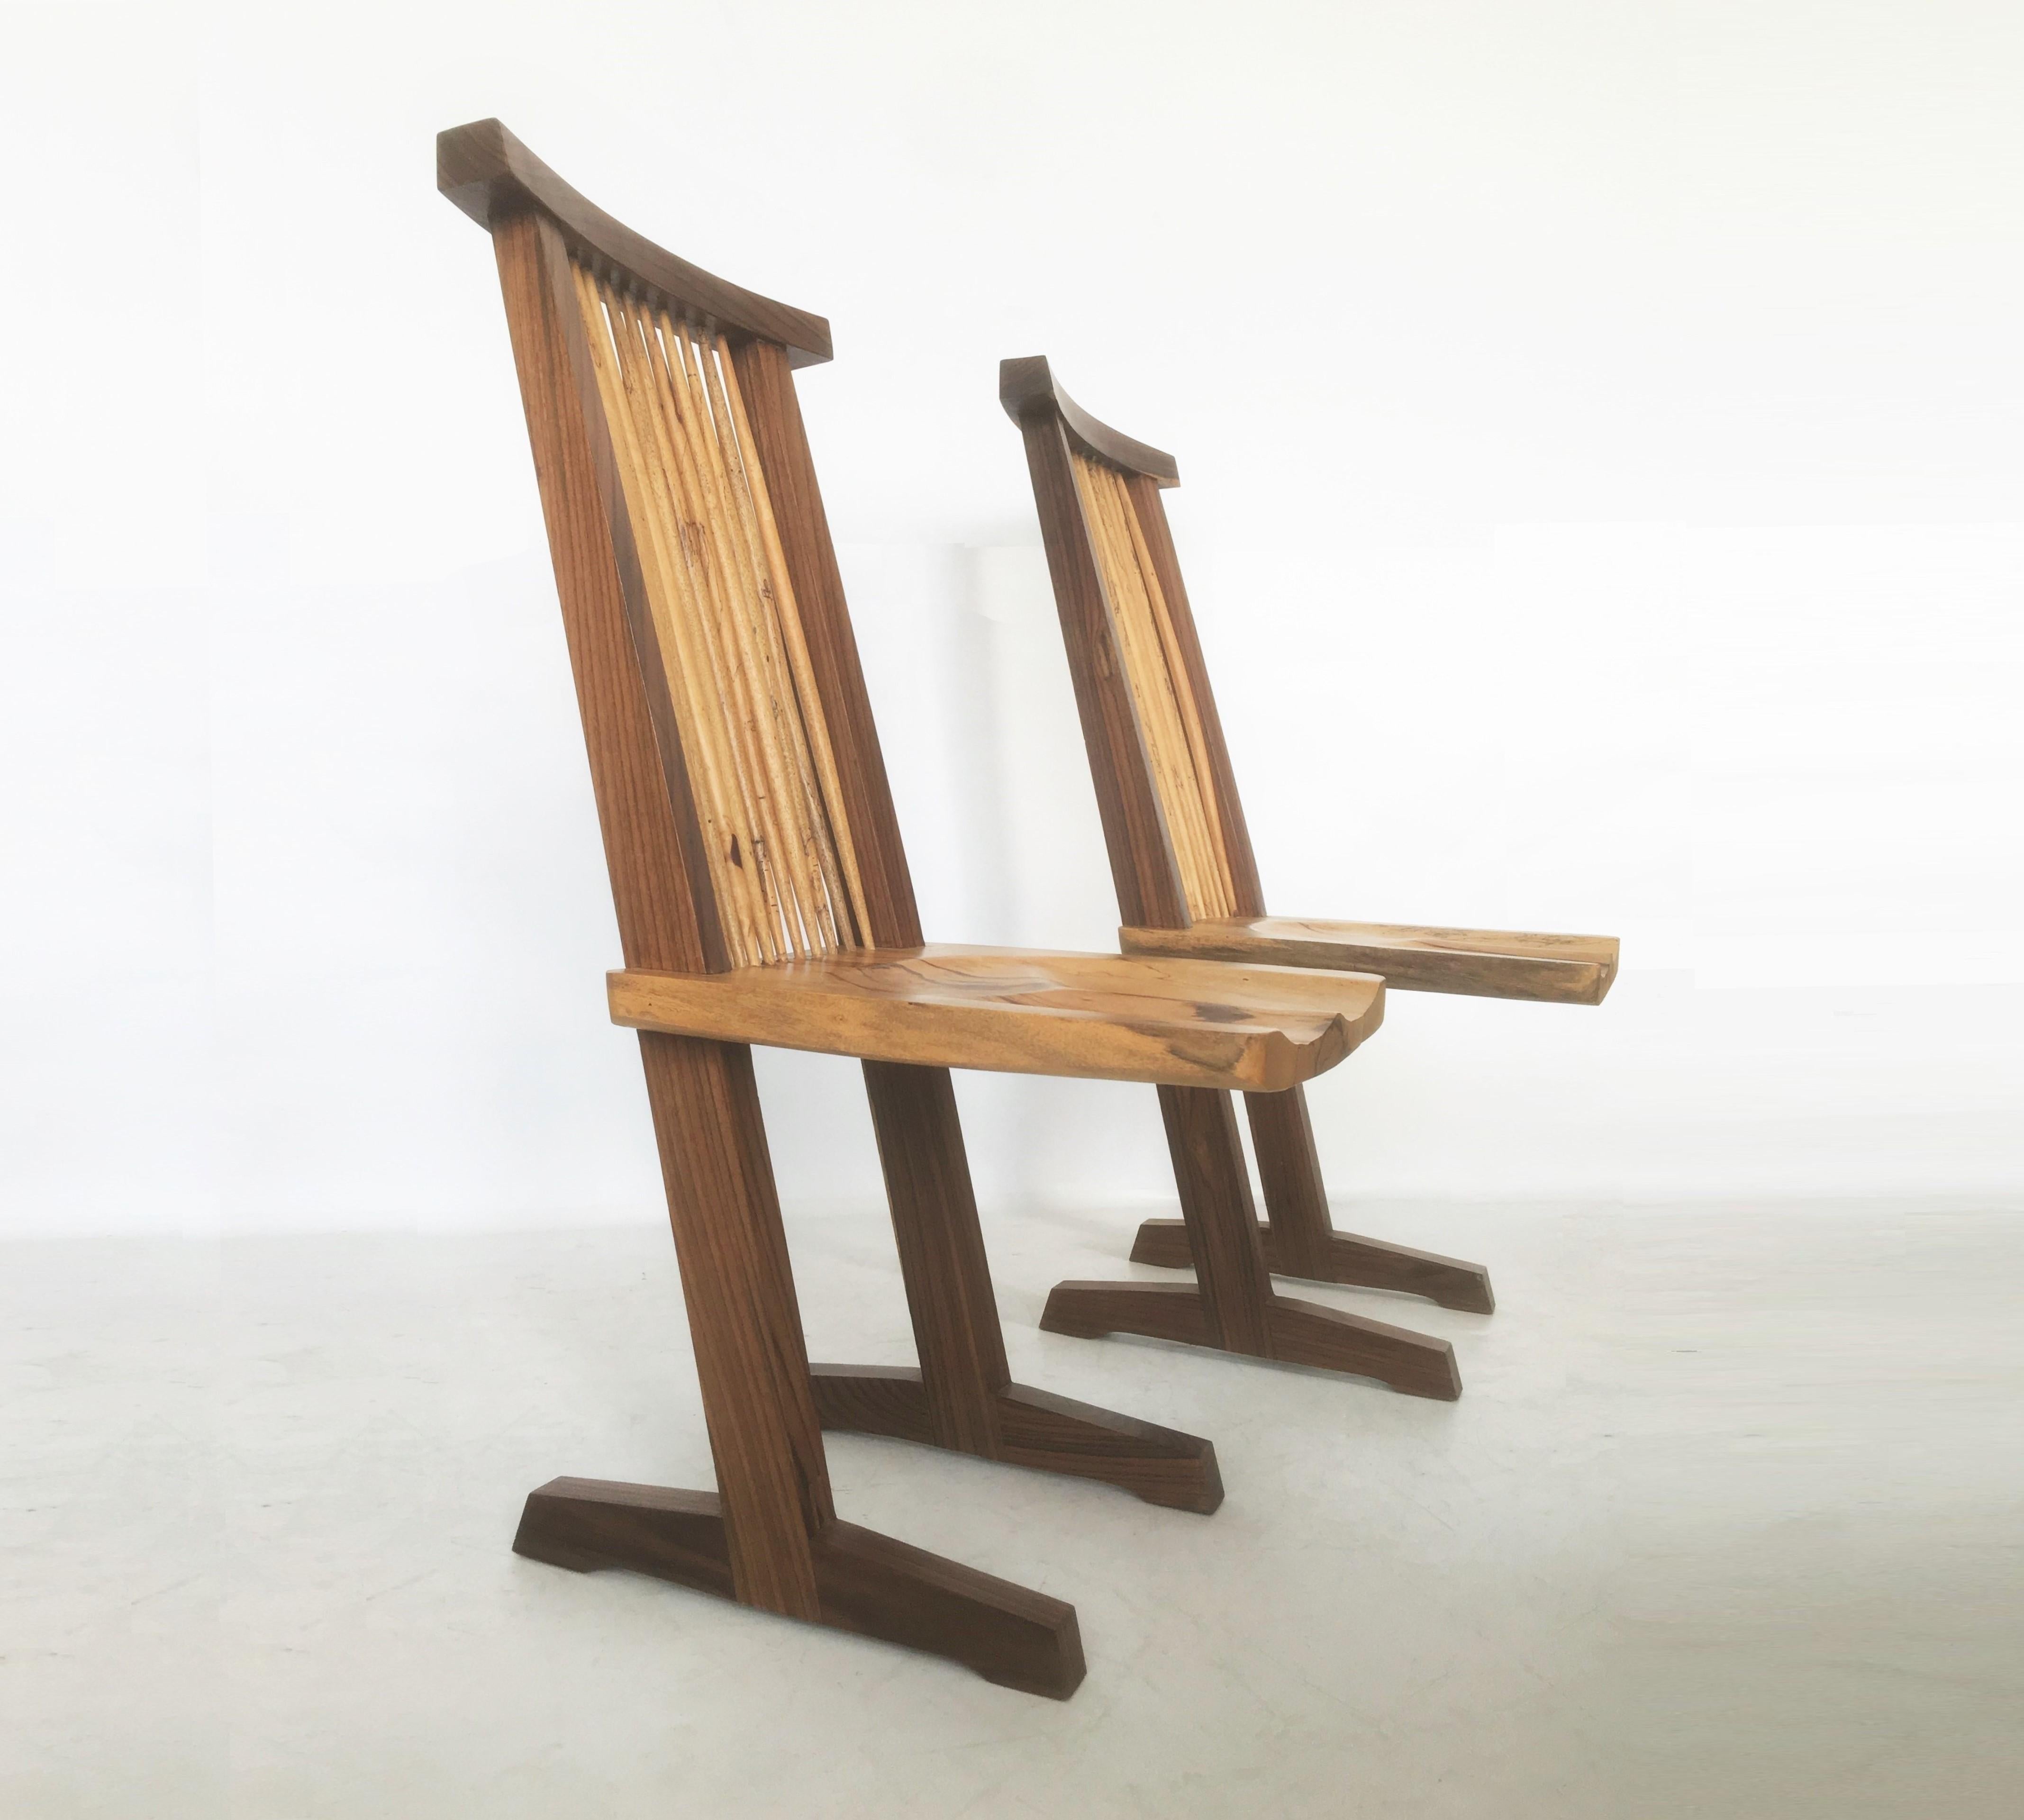 20th Century Vintage Pair of Conoid Chairs, after George Nakashima For Sale